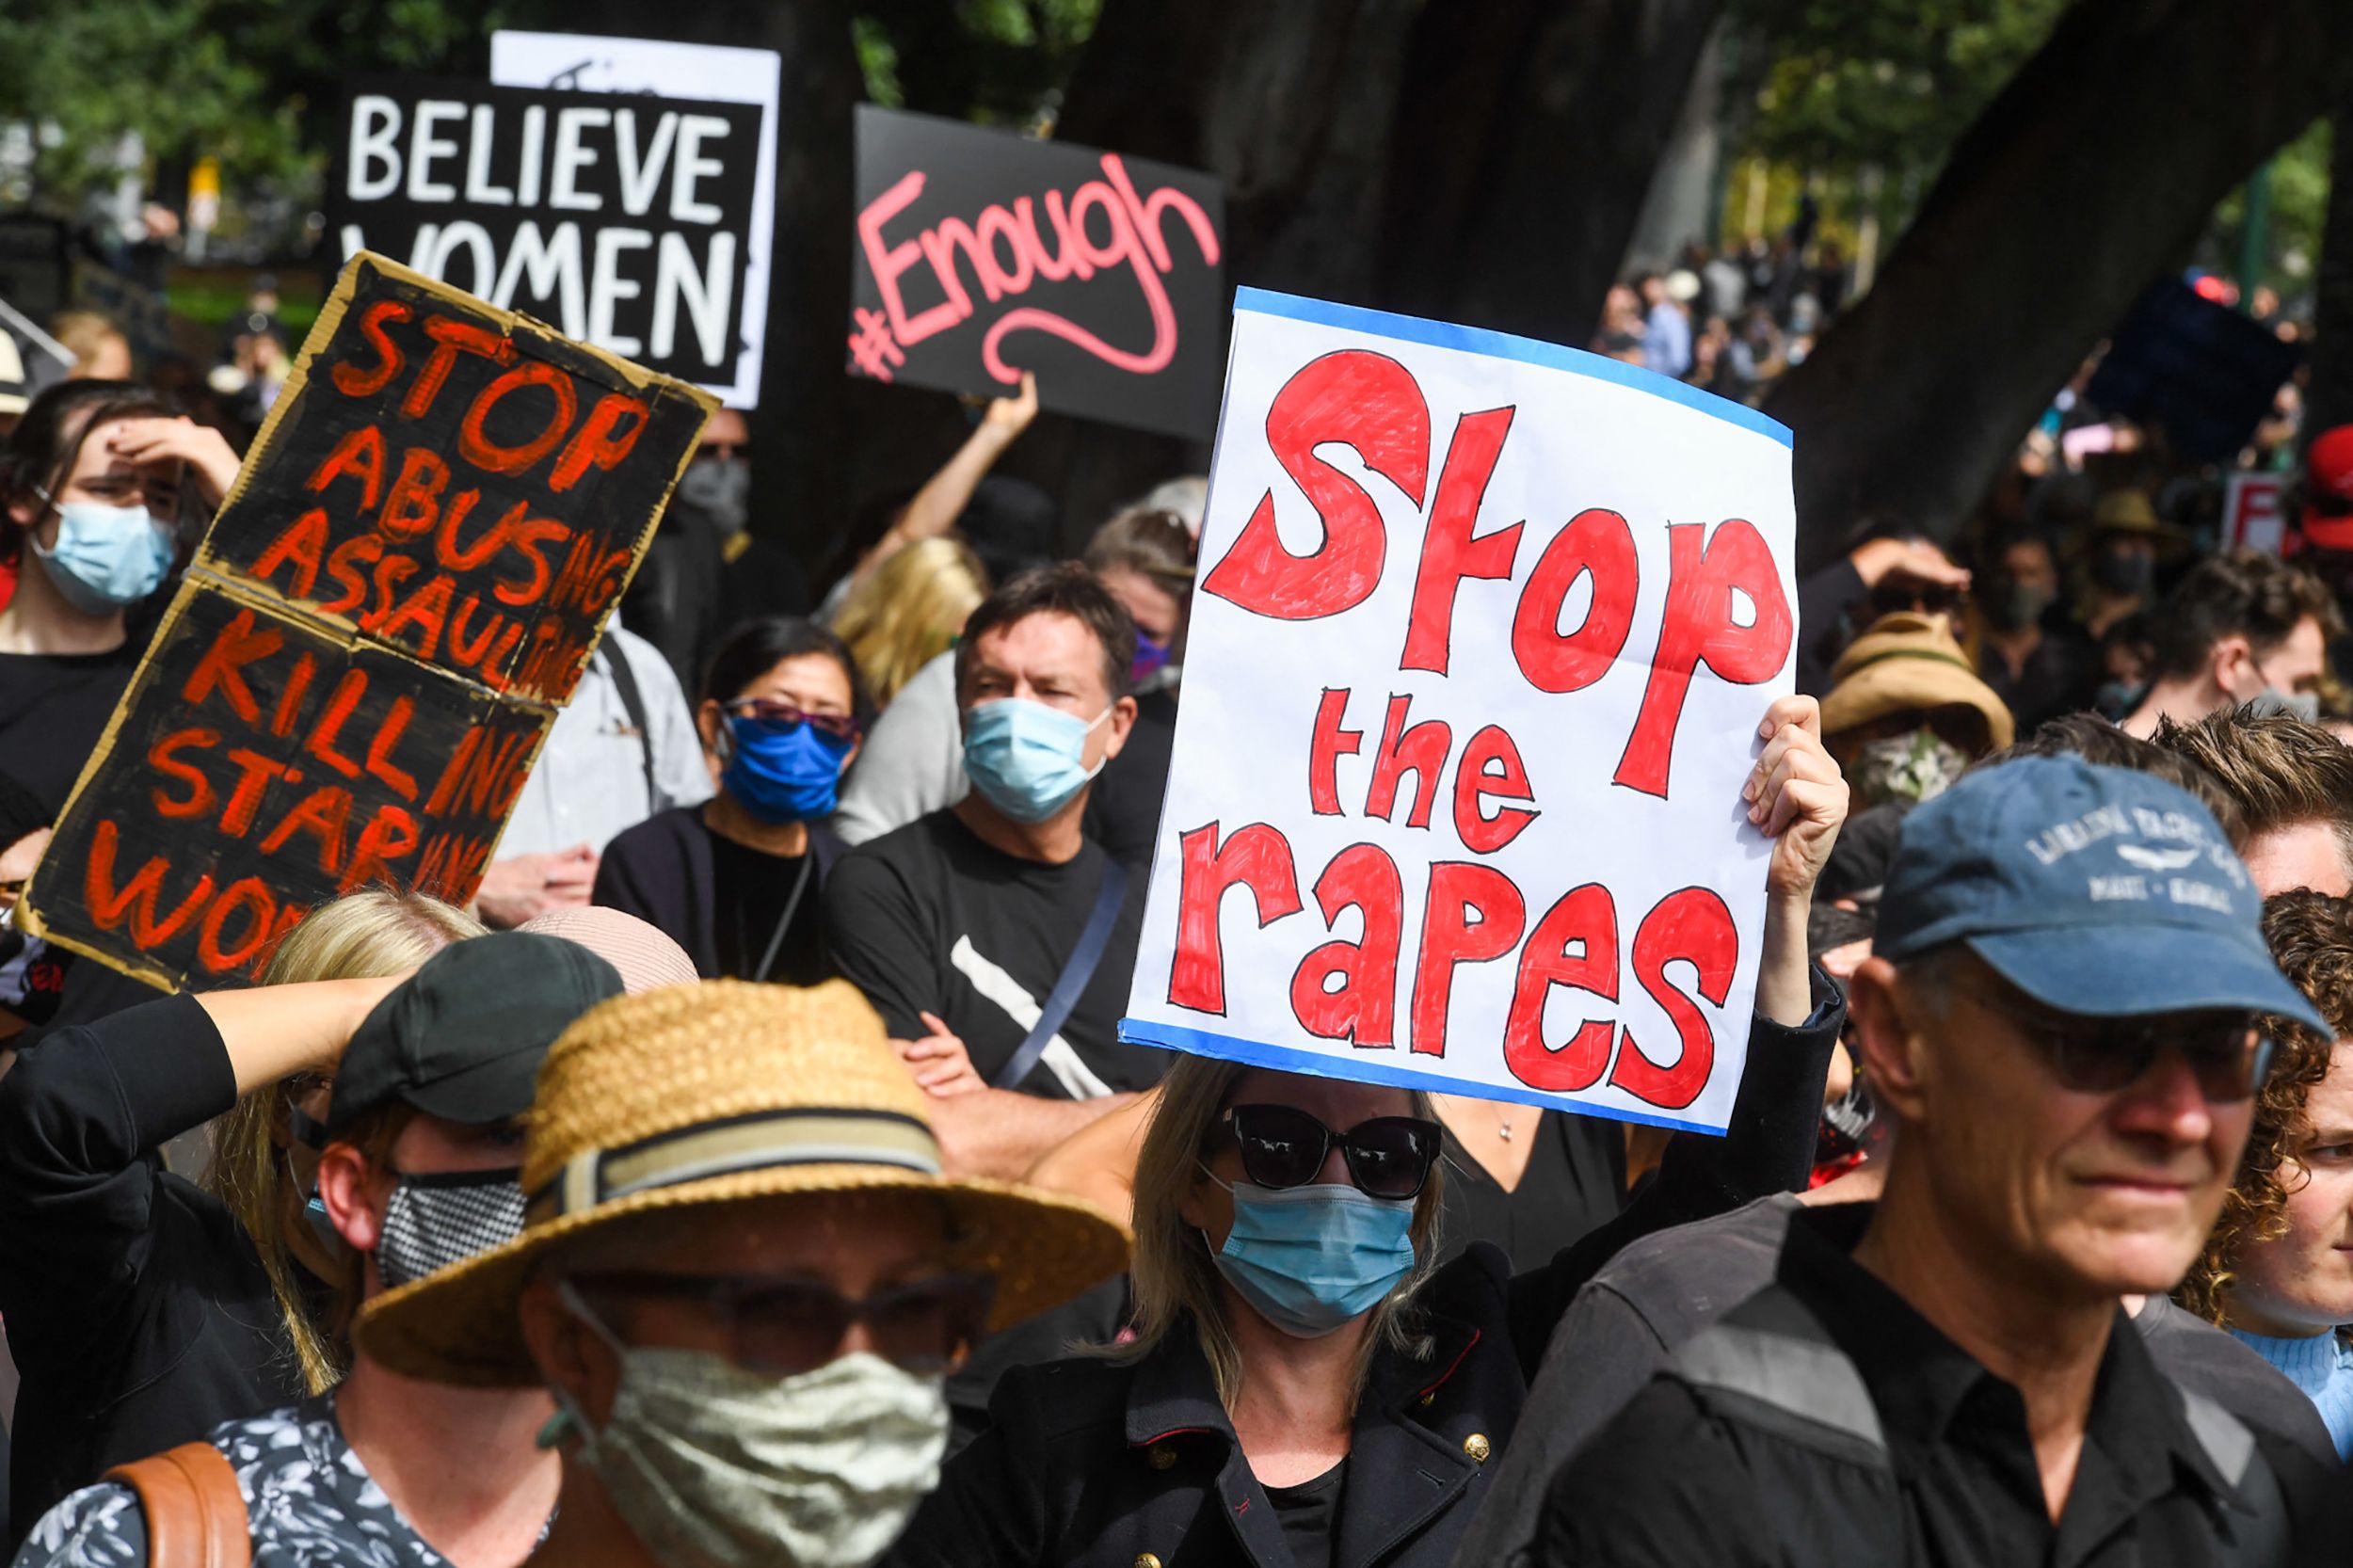 People attend a protest against sexual violence and gender inequality in Melbourne on 15 March, 2021